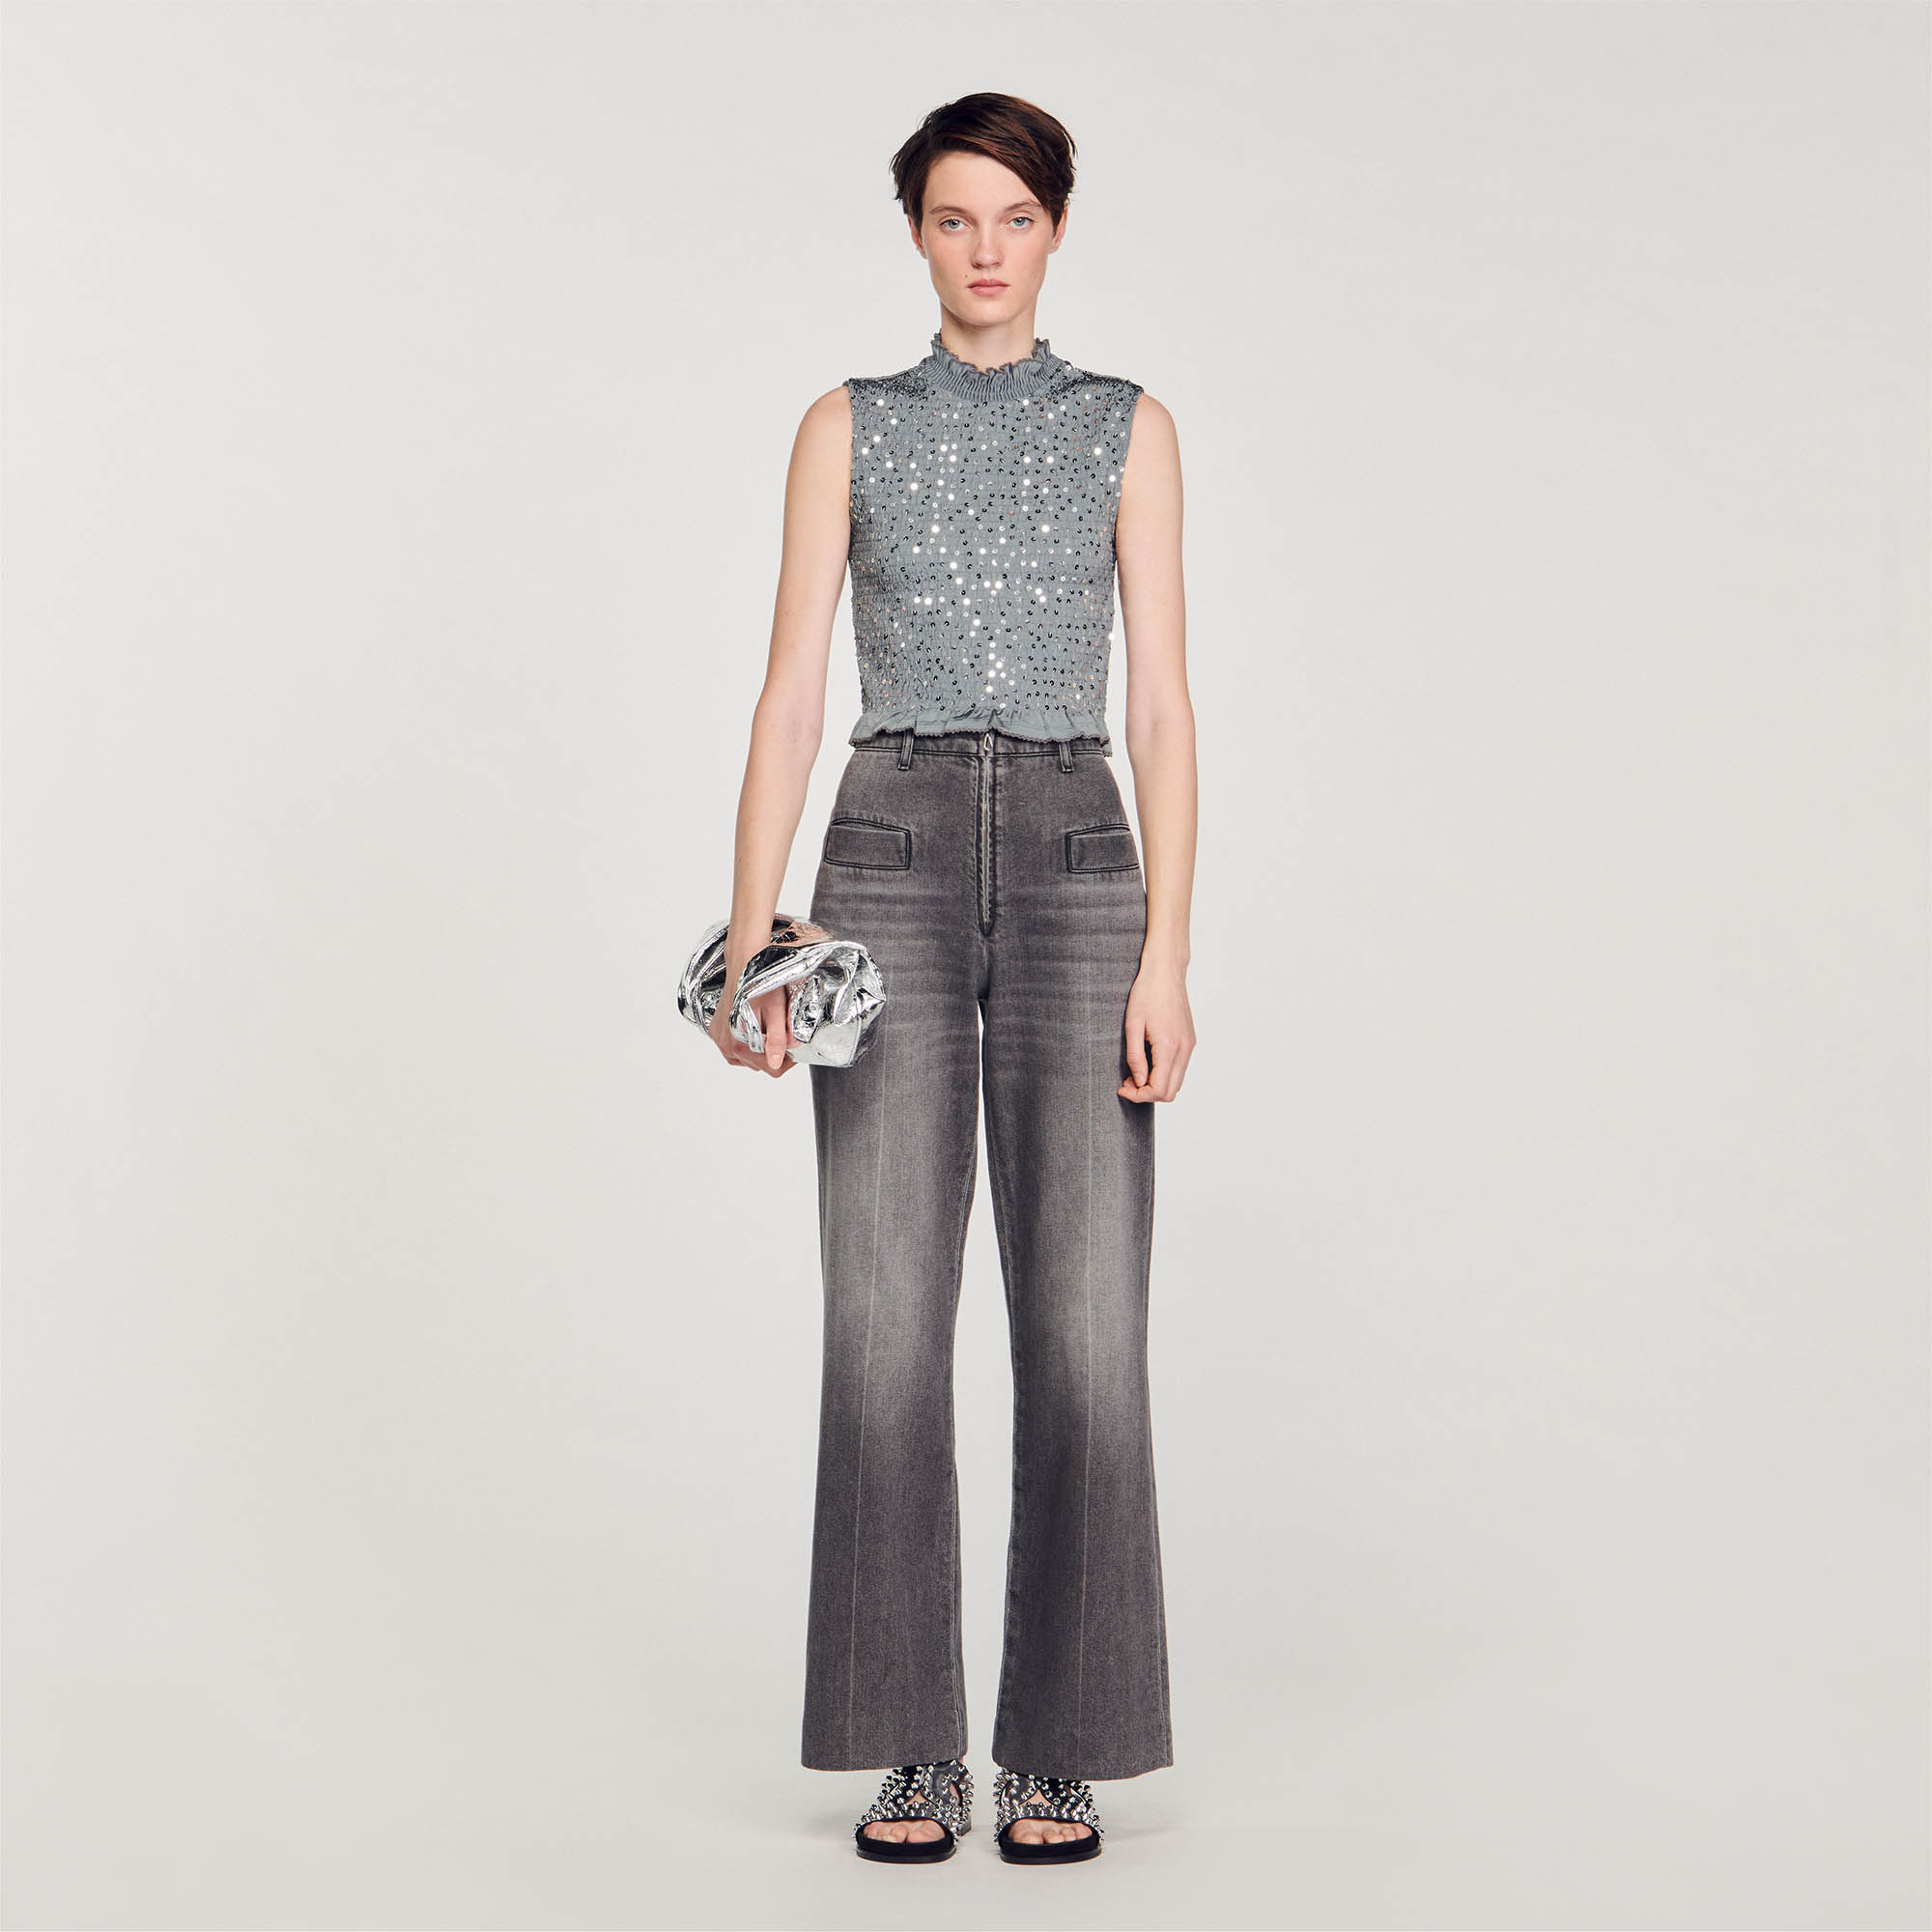 Sandro viscose Sleeveless smocked crop top embroidered with sequins, featuring a high neck and a ruffle at the bottom